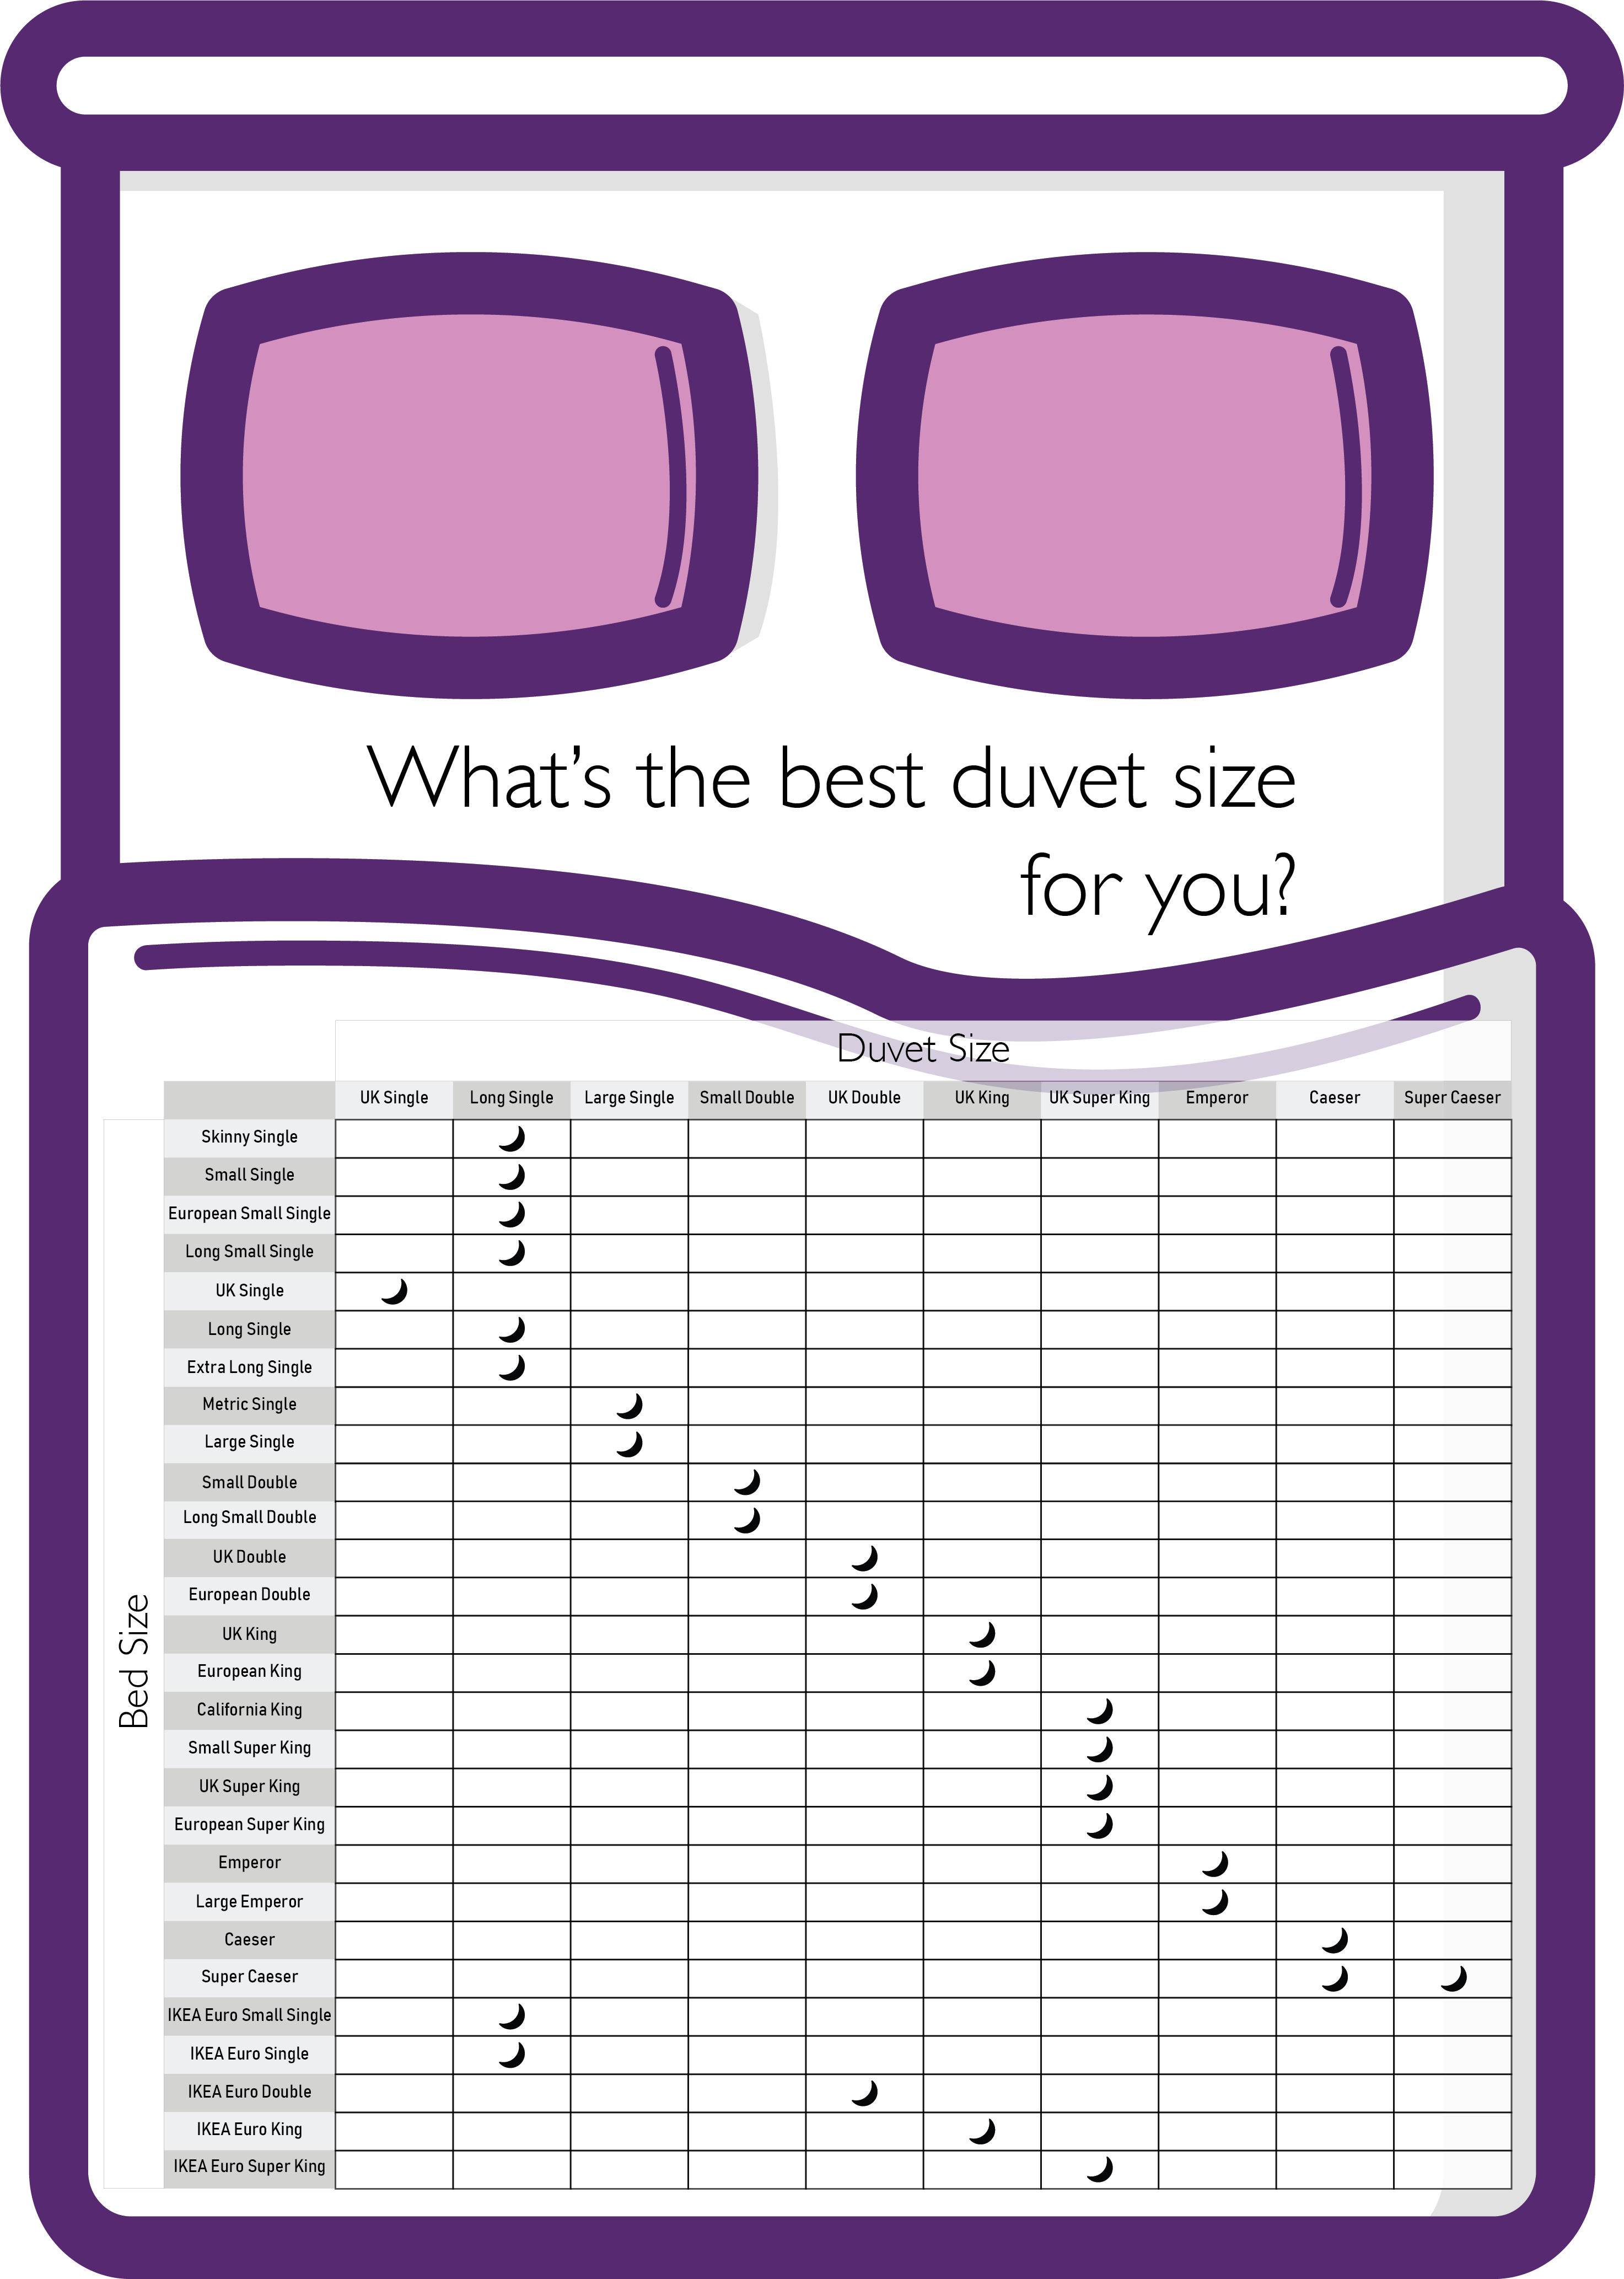 Duvet Size Guide What Size Duvet is Best for Your Bed?